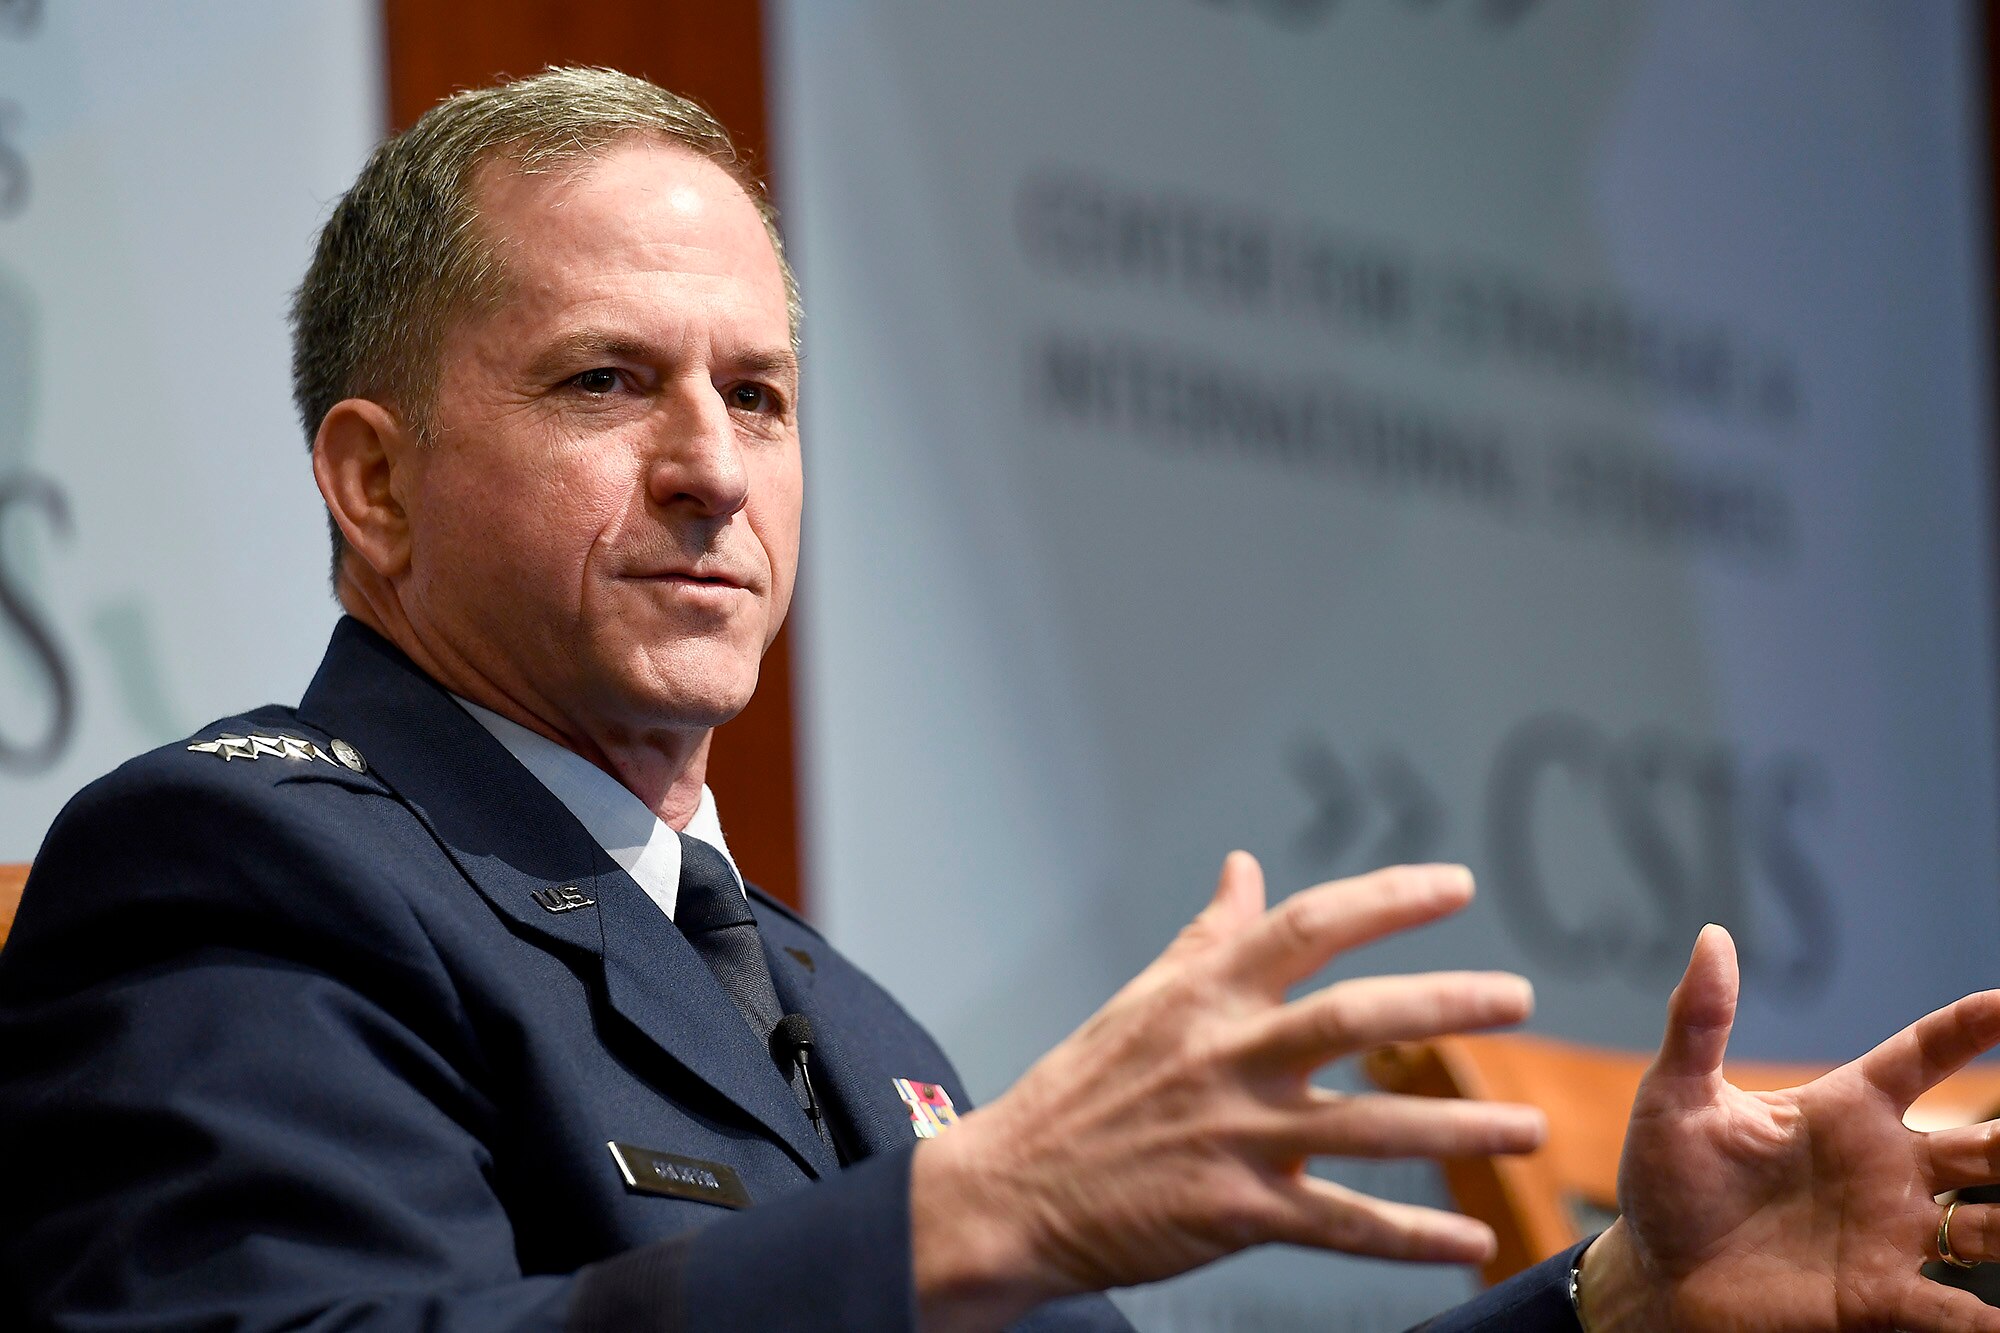 Air Force Chief of Staff Gen. David L. Goldfein speaks to a military strategy forum at a Center for Strategic and International Studies discussion on the imperatives of airpower and challenges for the next fight Feb. 23, 2017, in Washington, D.C. (U.S. Air Force photo/Scott M.Ash)